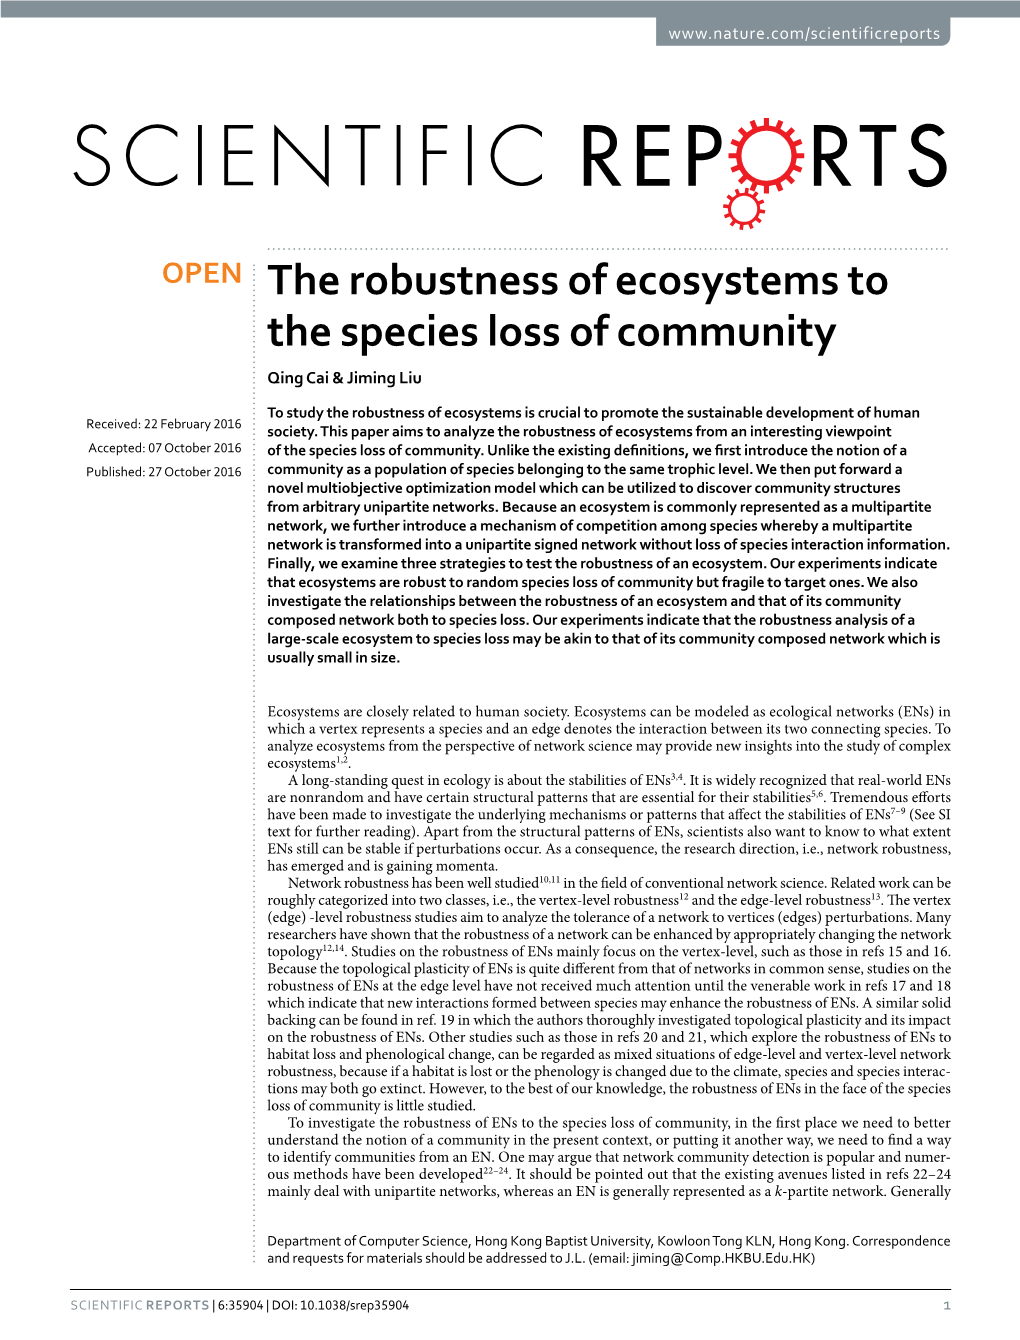 The Robustness of Ecosystems to the Species Loss of Community Qing Cai & Jiming Liu